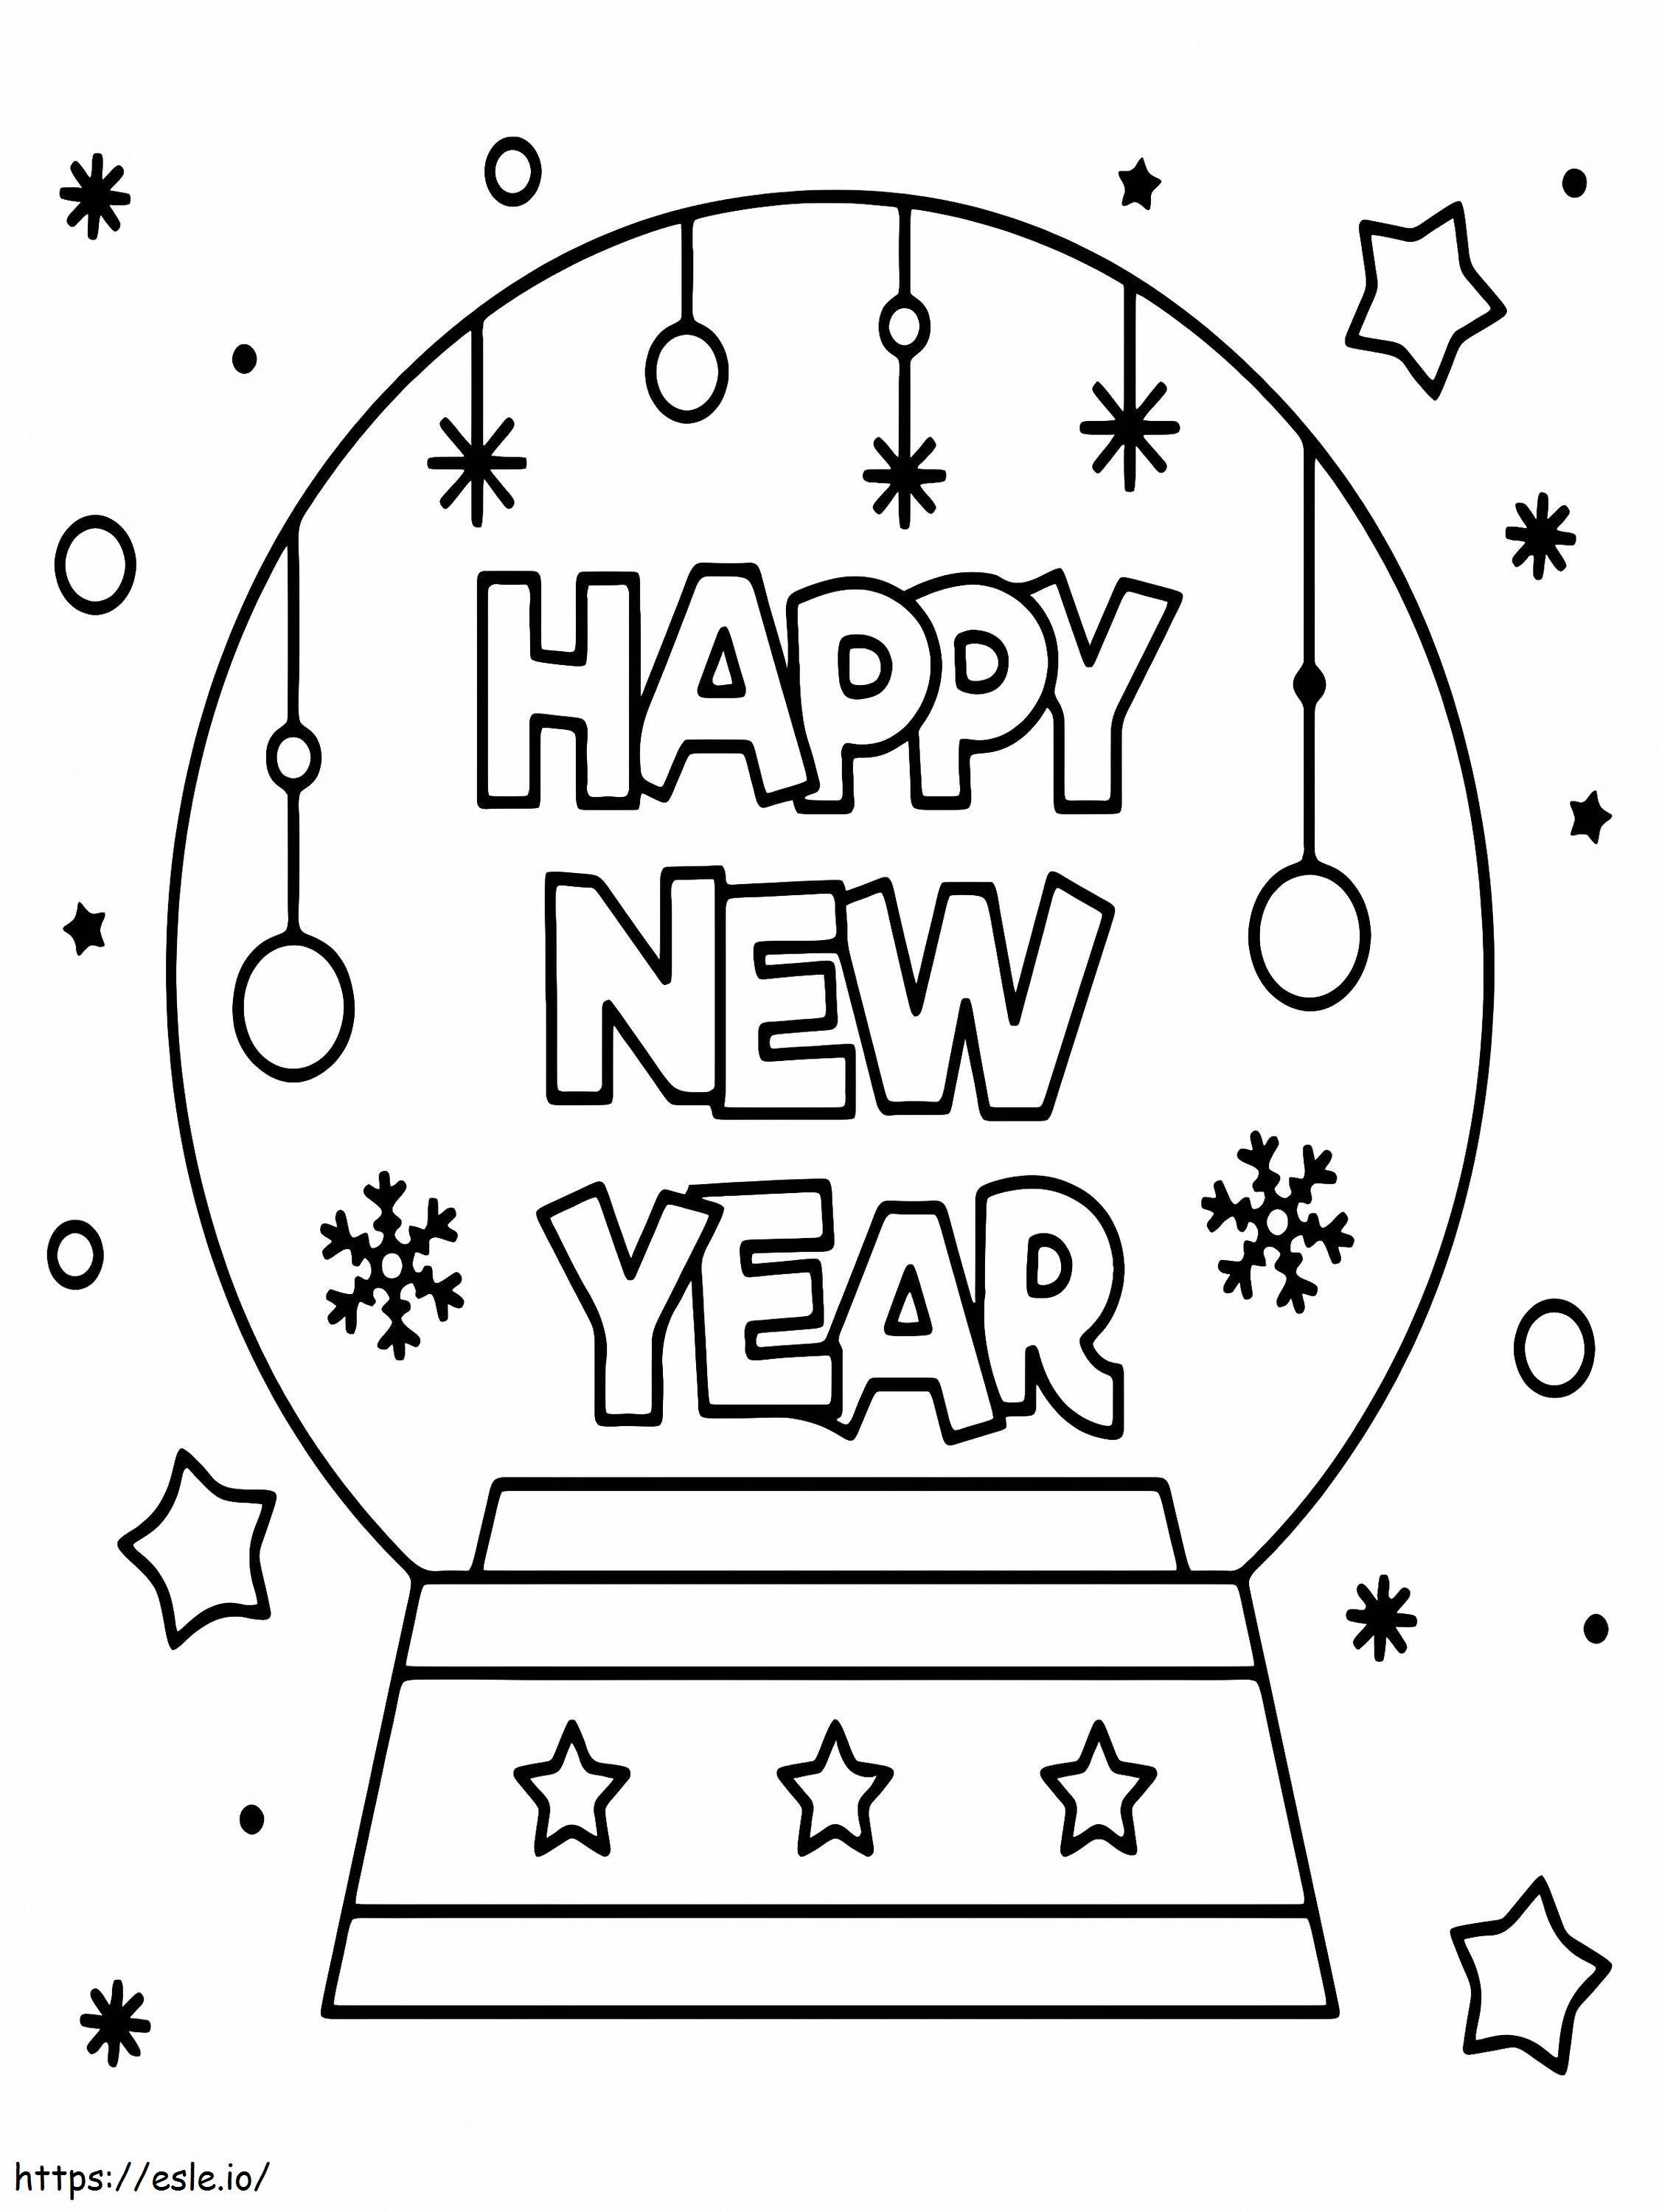 Happy New Year Coloring 11 coloring page